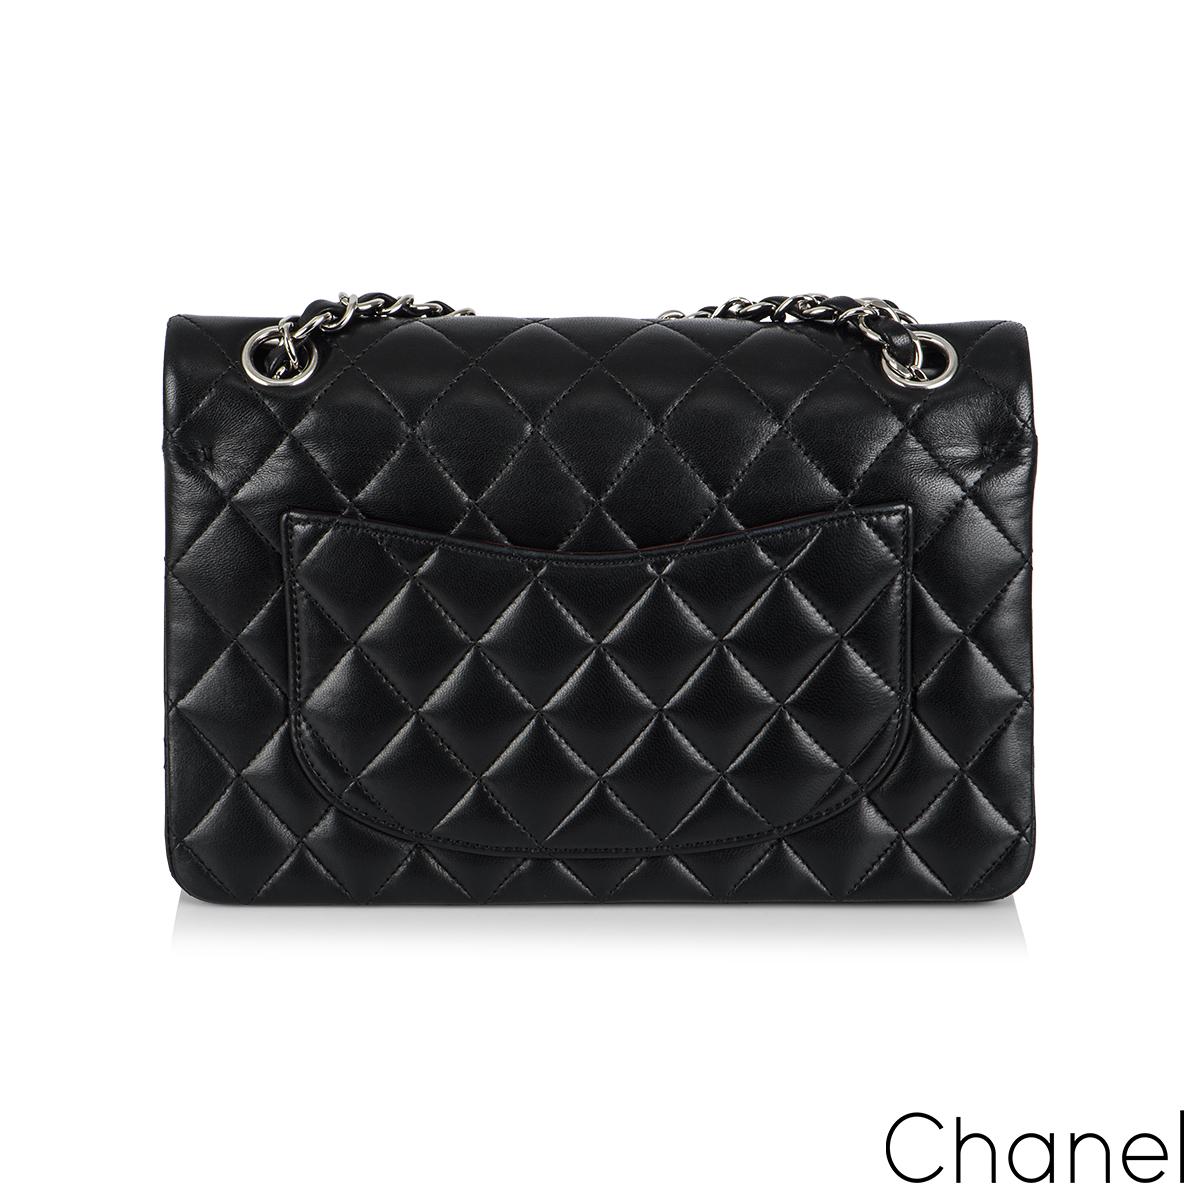 A Chic And Timeless Classic Chanel Double Flap Handbag. The exterior of this small classic is crafted with black lambskin leather with silver tone hardware. The small flap is designed with the signature diamond style stitching. It features a front